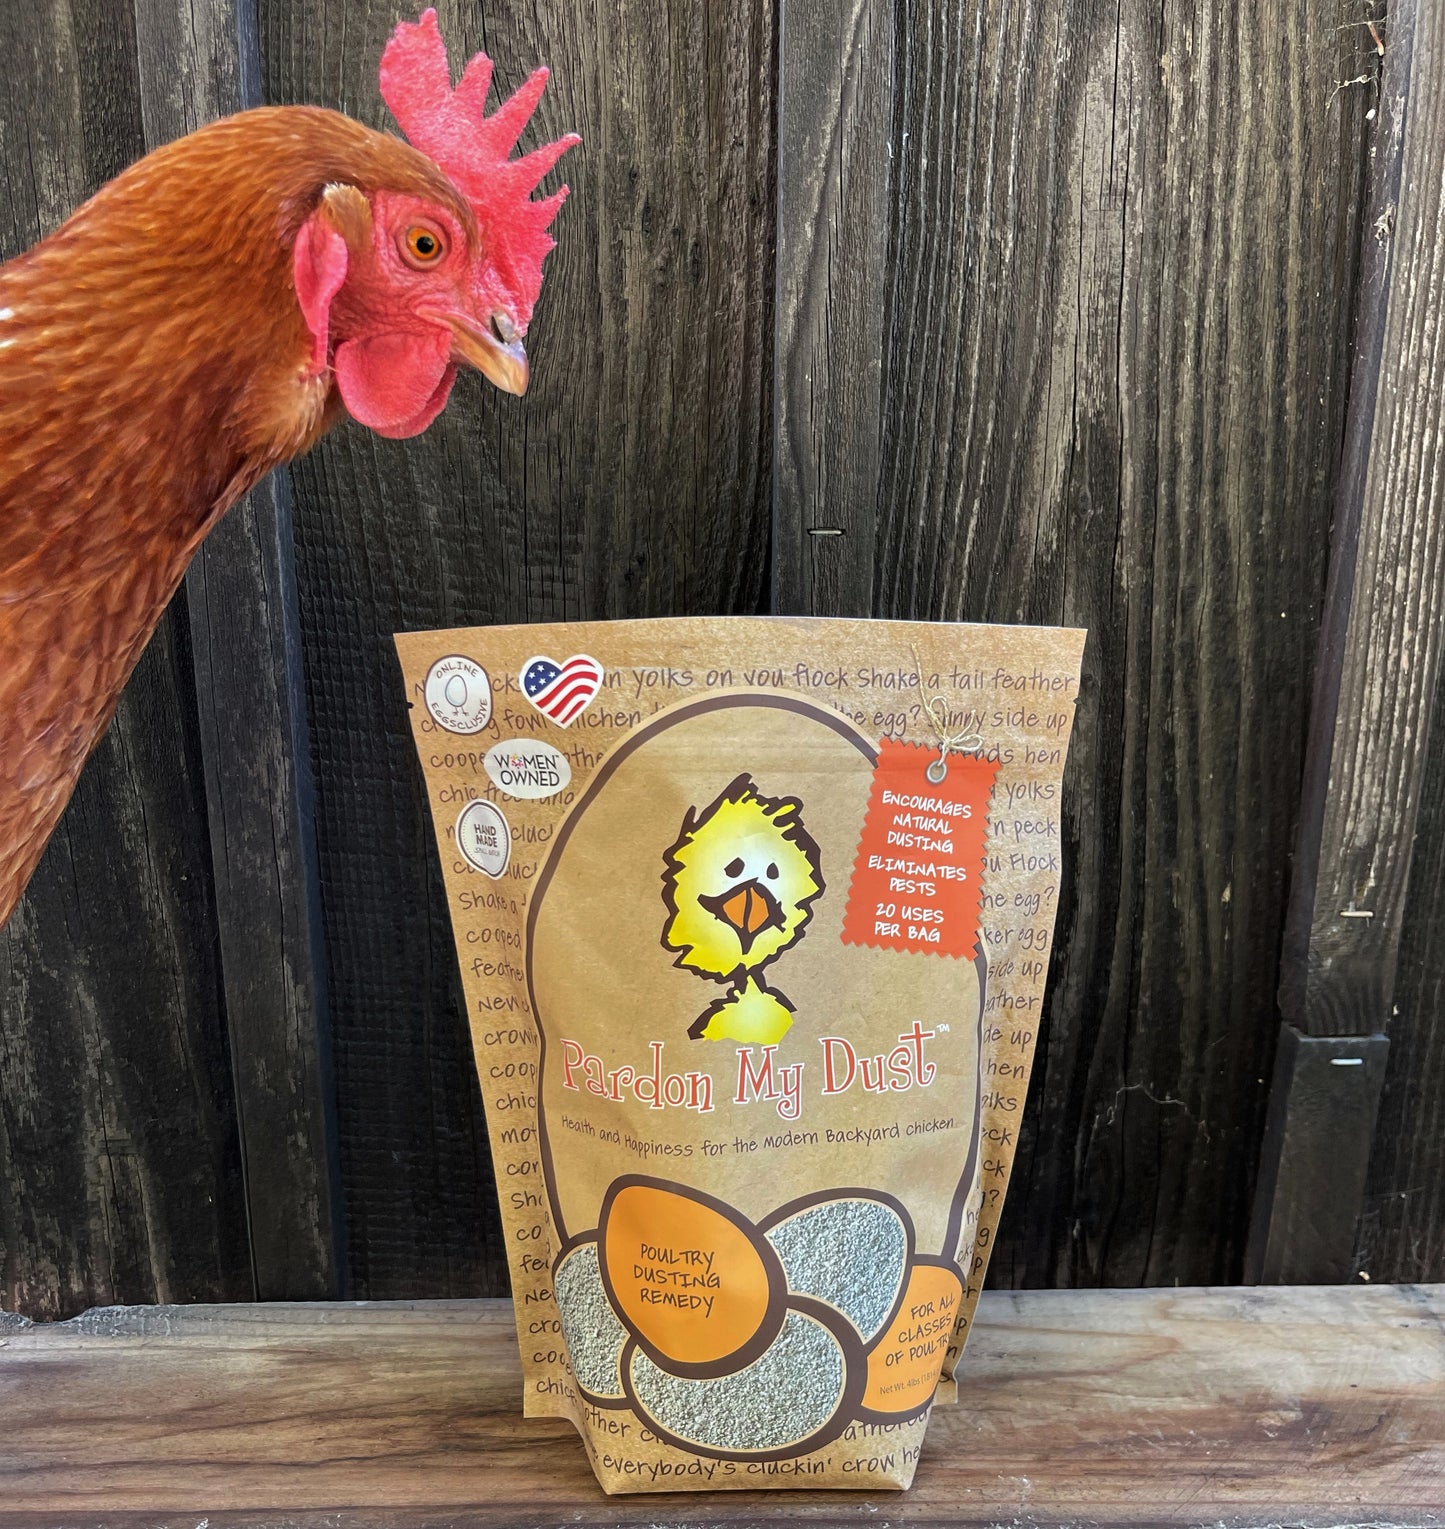 Wooden background with a handsome rooster standing above a package of Pardon My Dust. Treats for Chickens Organic Ingredients Pet Care Poultry Care Pardon My Dust Backyard Chicken Parents Organic Ingredients Treats for Chickens treats, supplements, herbal nesting box blend, + poultry care. Est 2009 by Dawn in Sonoma County, California, USA. TFC.